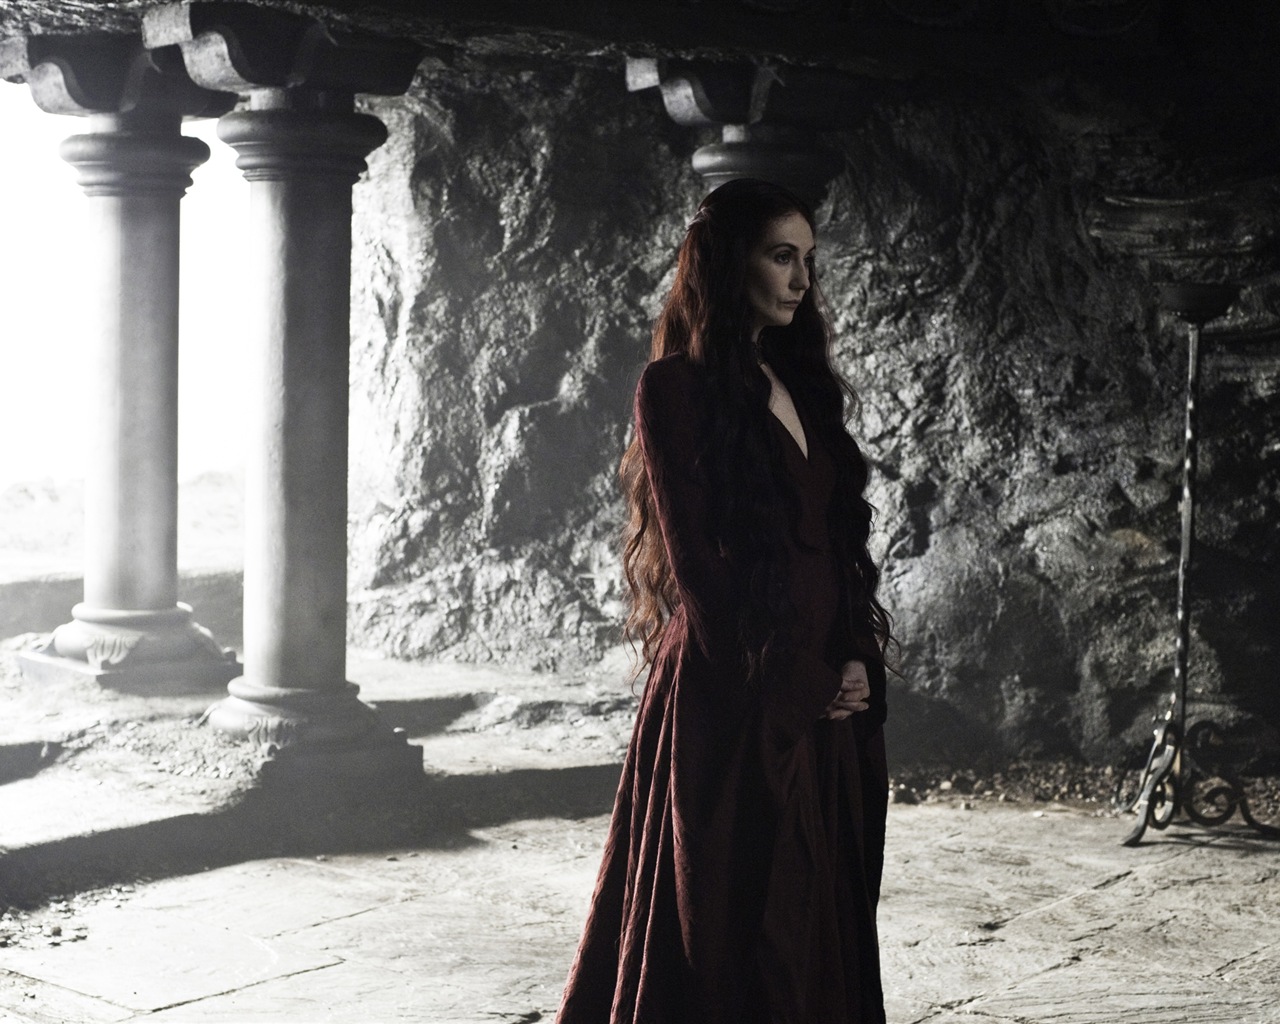 A Song of Ice and Fire: Game of Thrones HD wallpapers #34 - 1280x1024